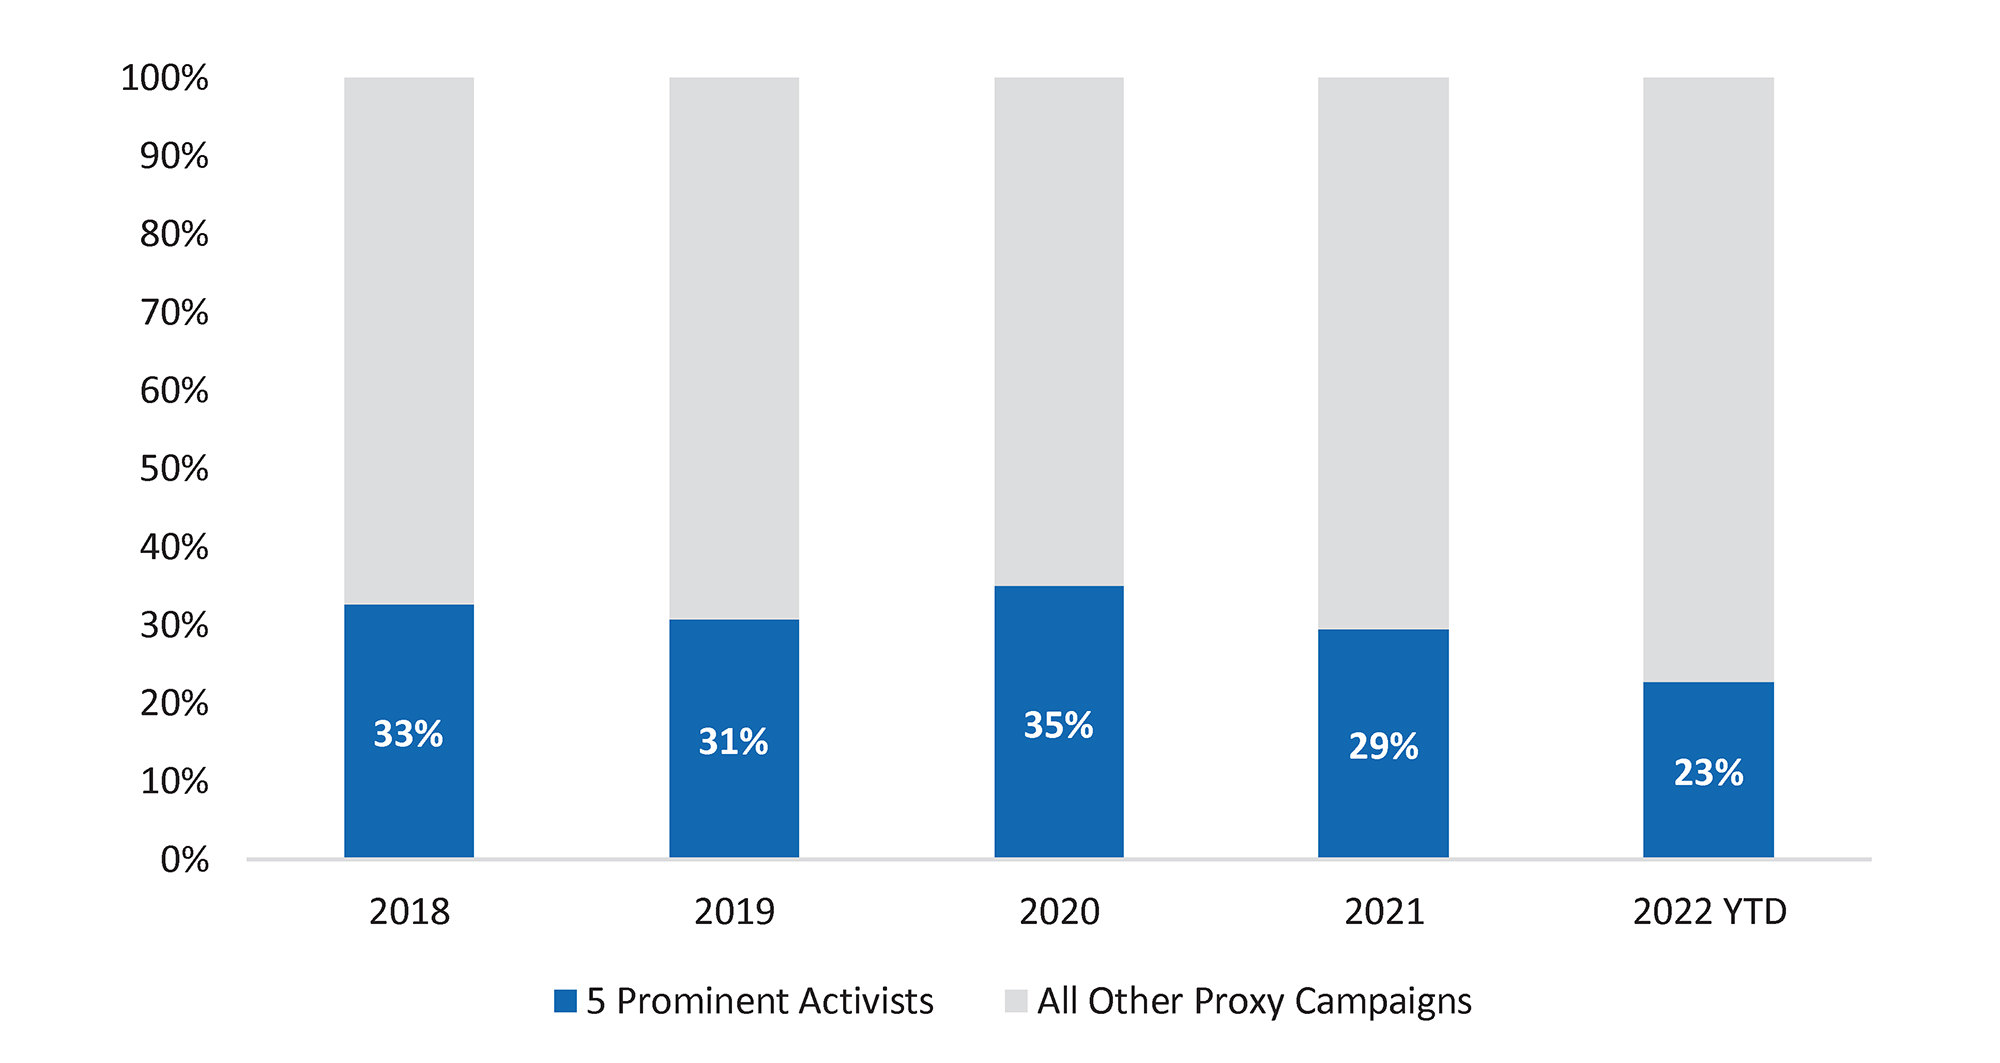 Prominent Activists as a % of Total Proxy Campaigns